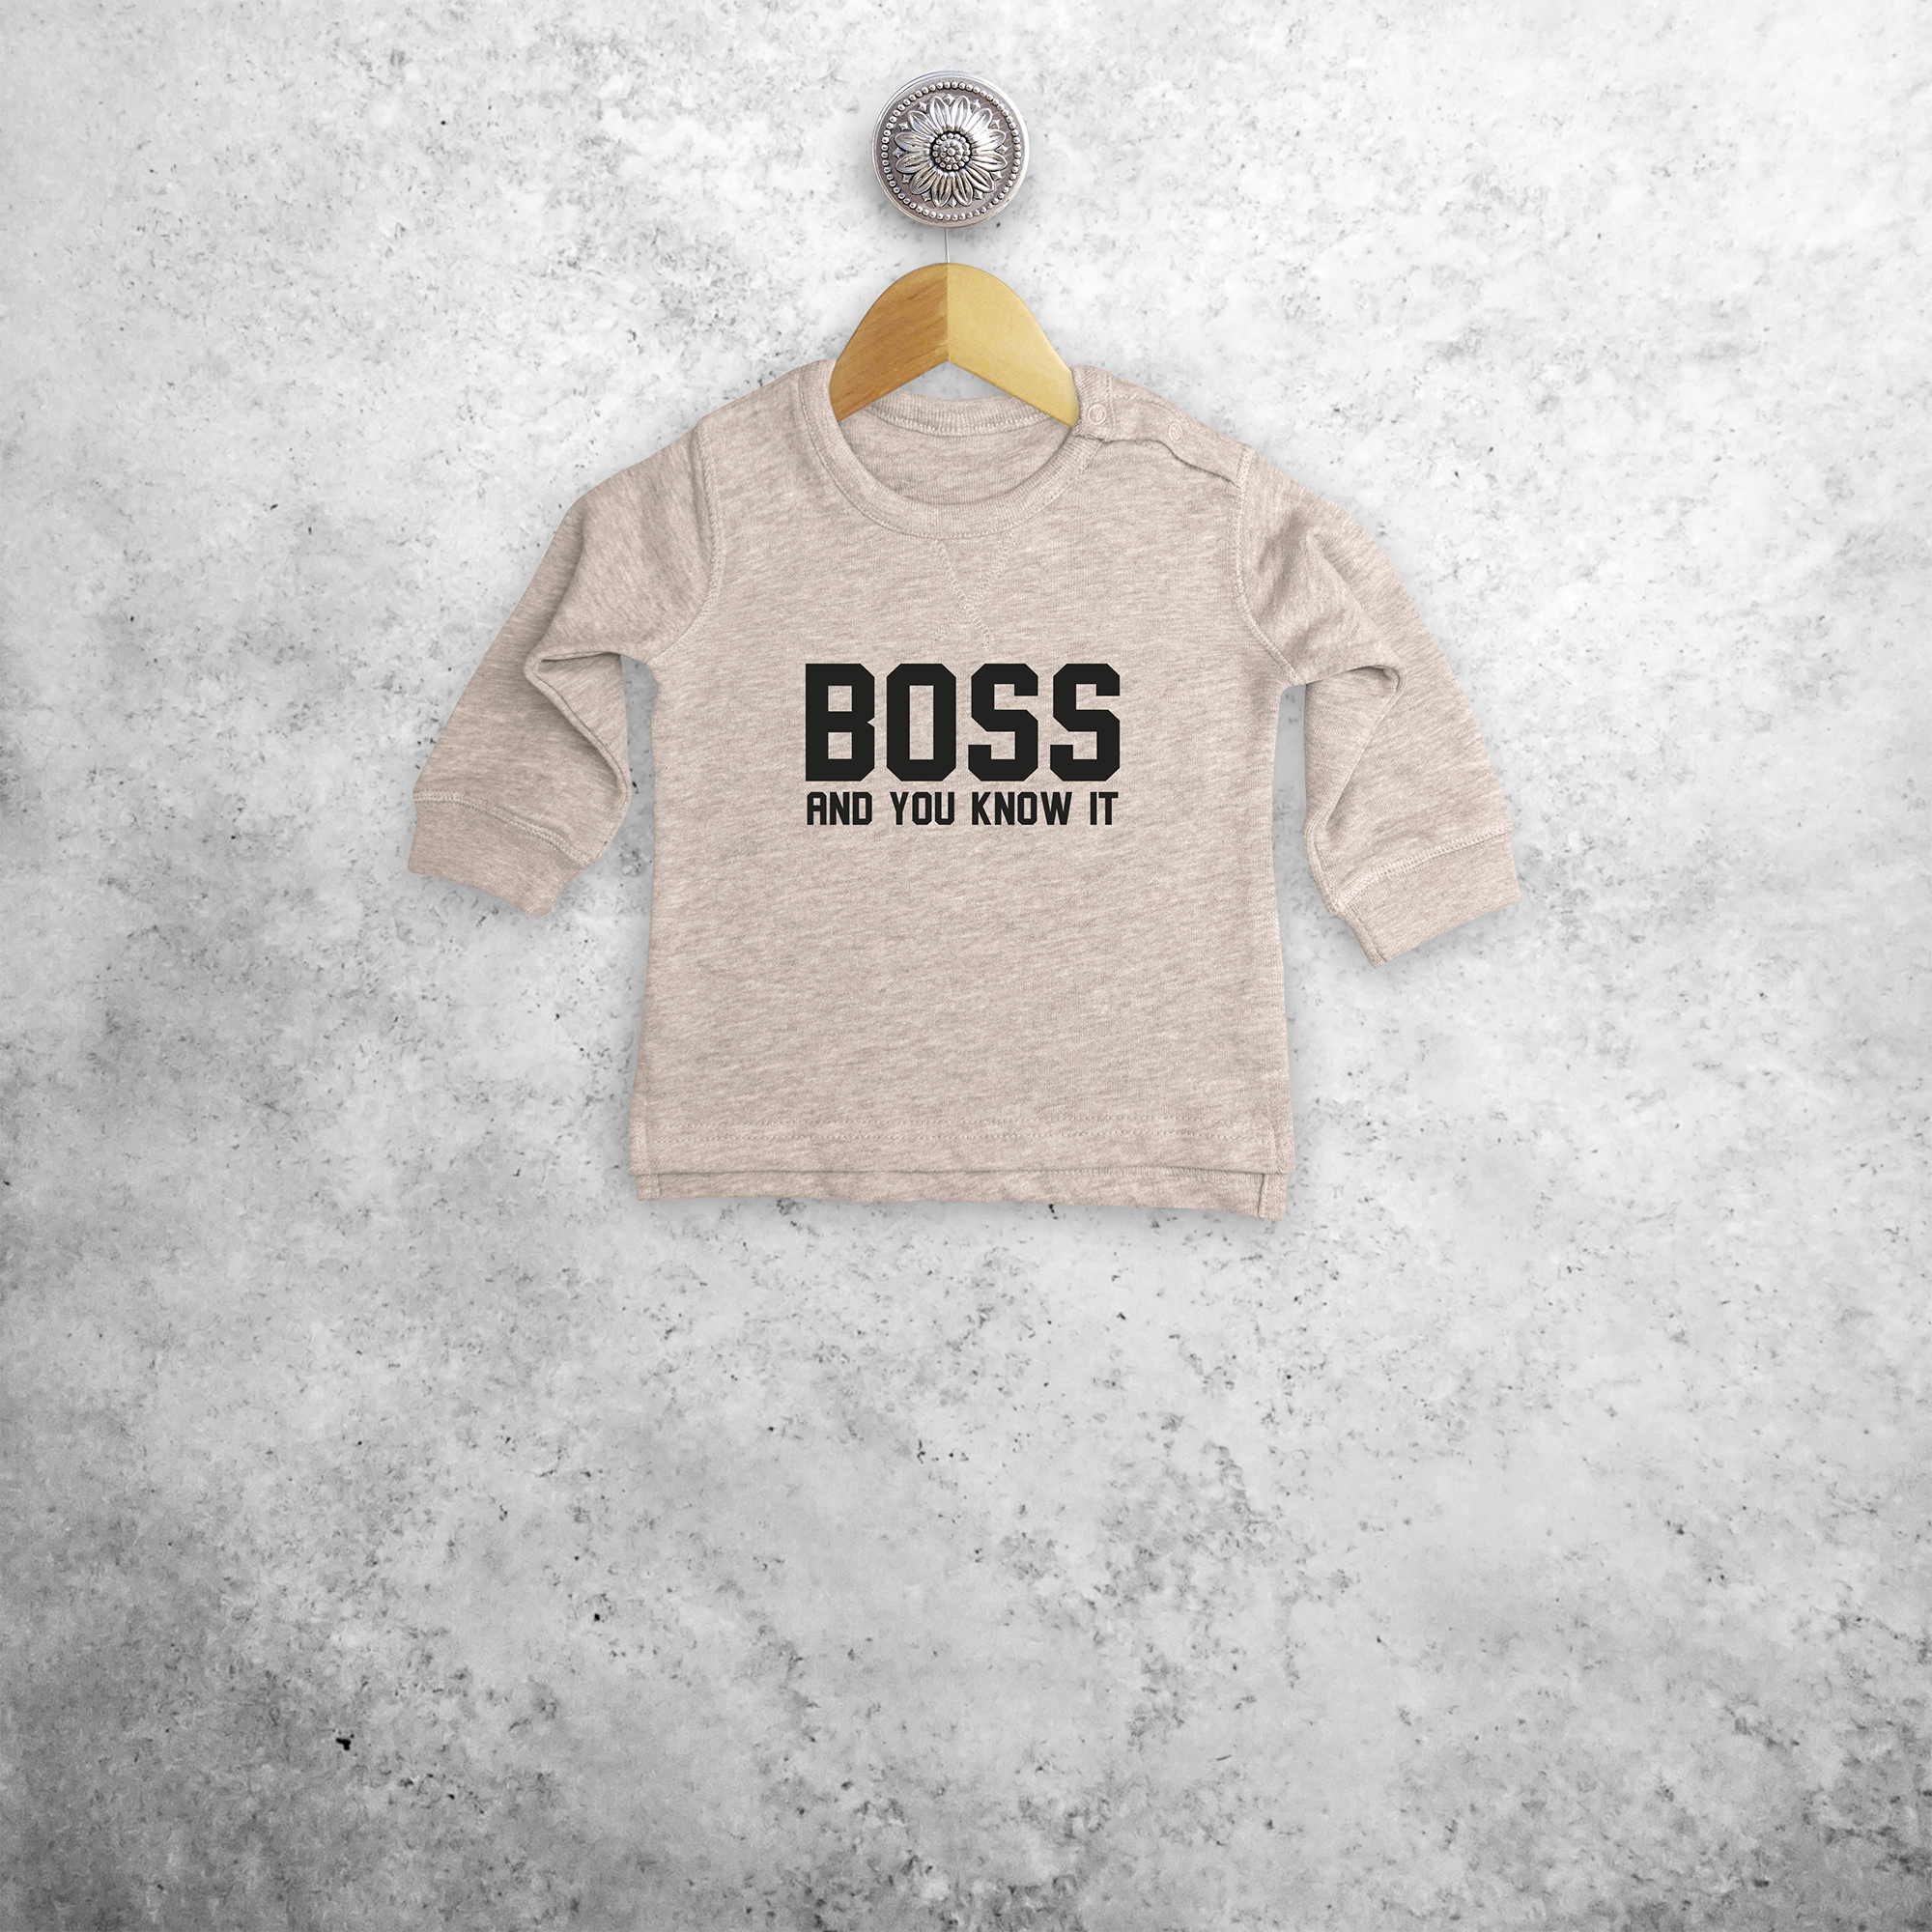 'Boss and you know it' baby sweater